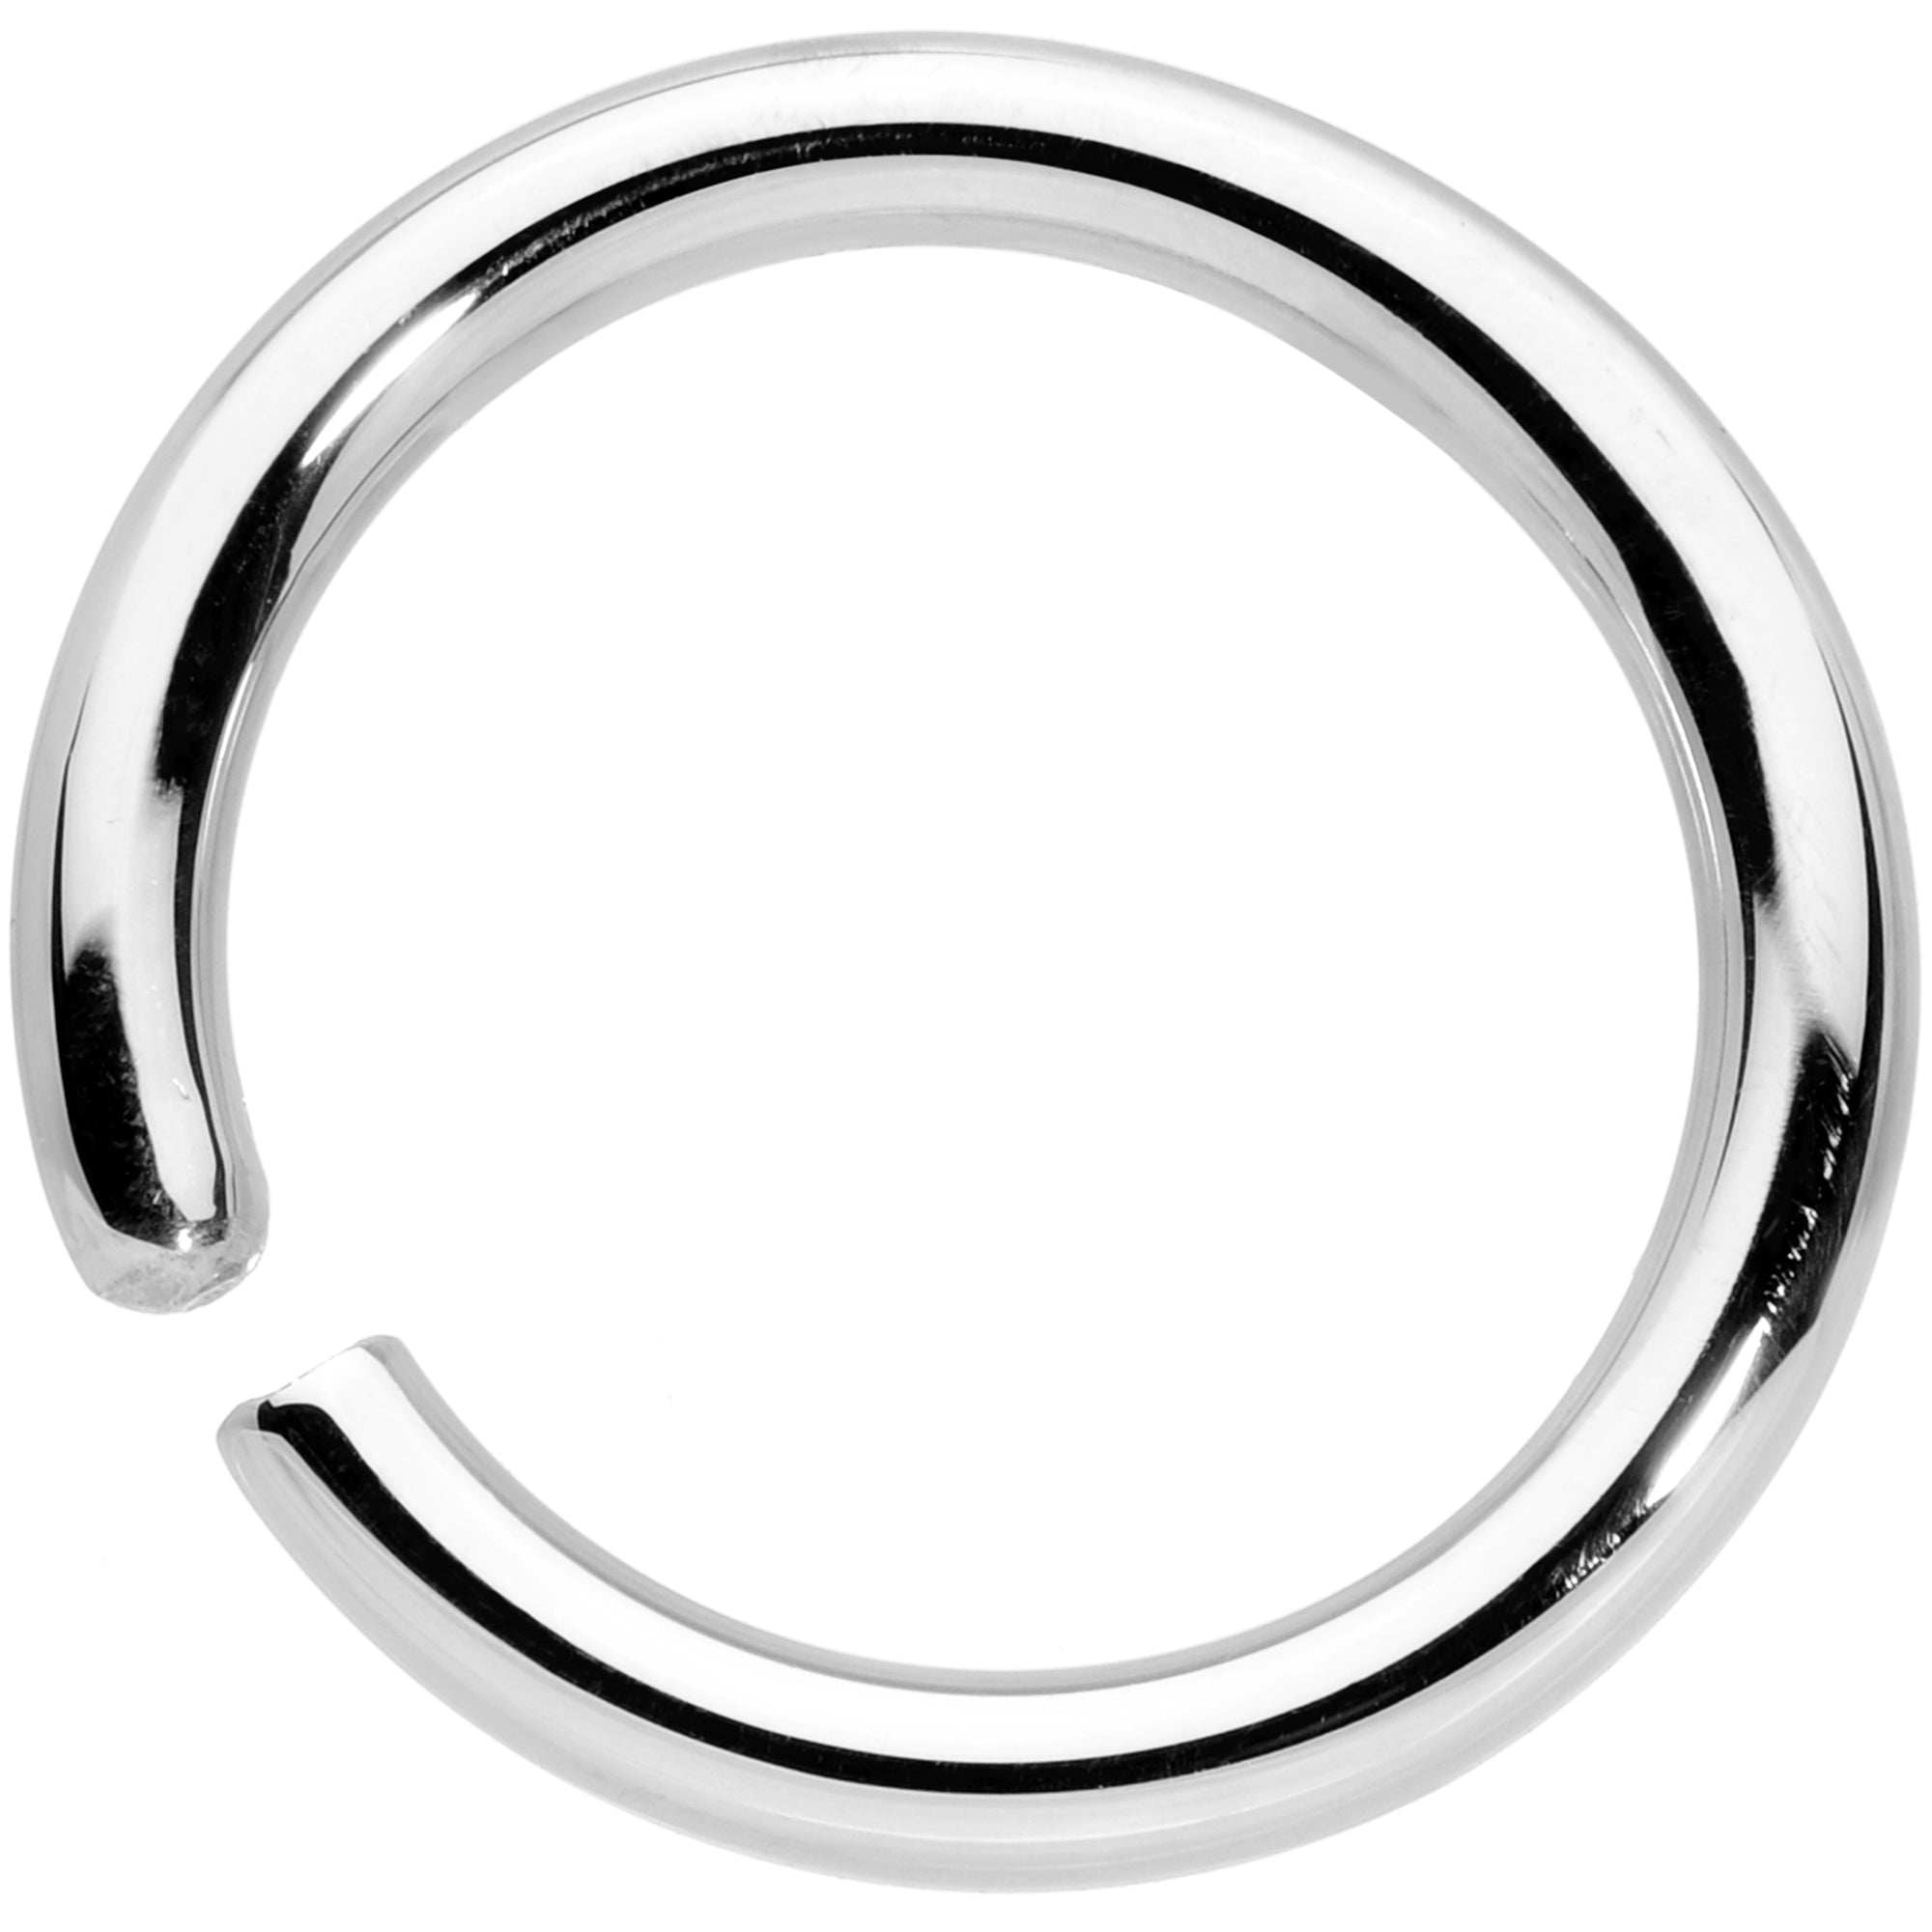 14 Gauge 3/8 Handcrafted Solid 14k White Gold Seamless Circular Ring